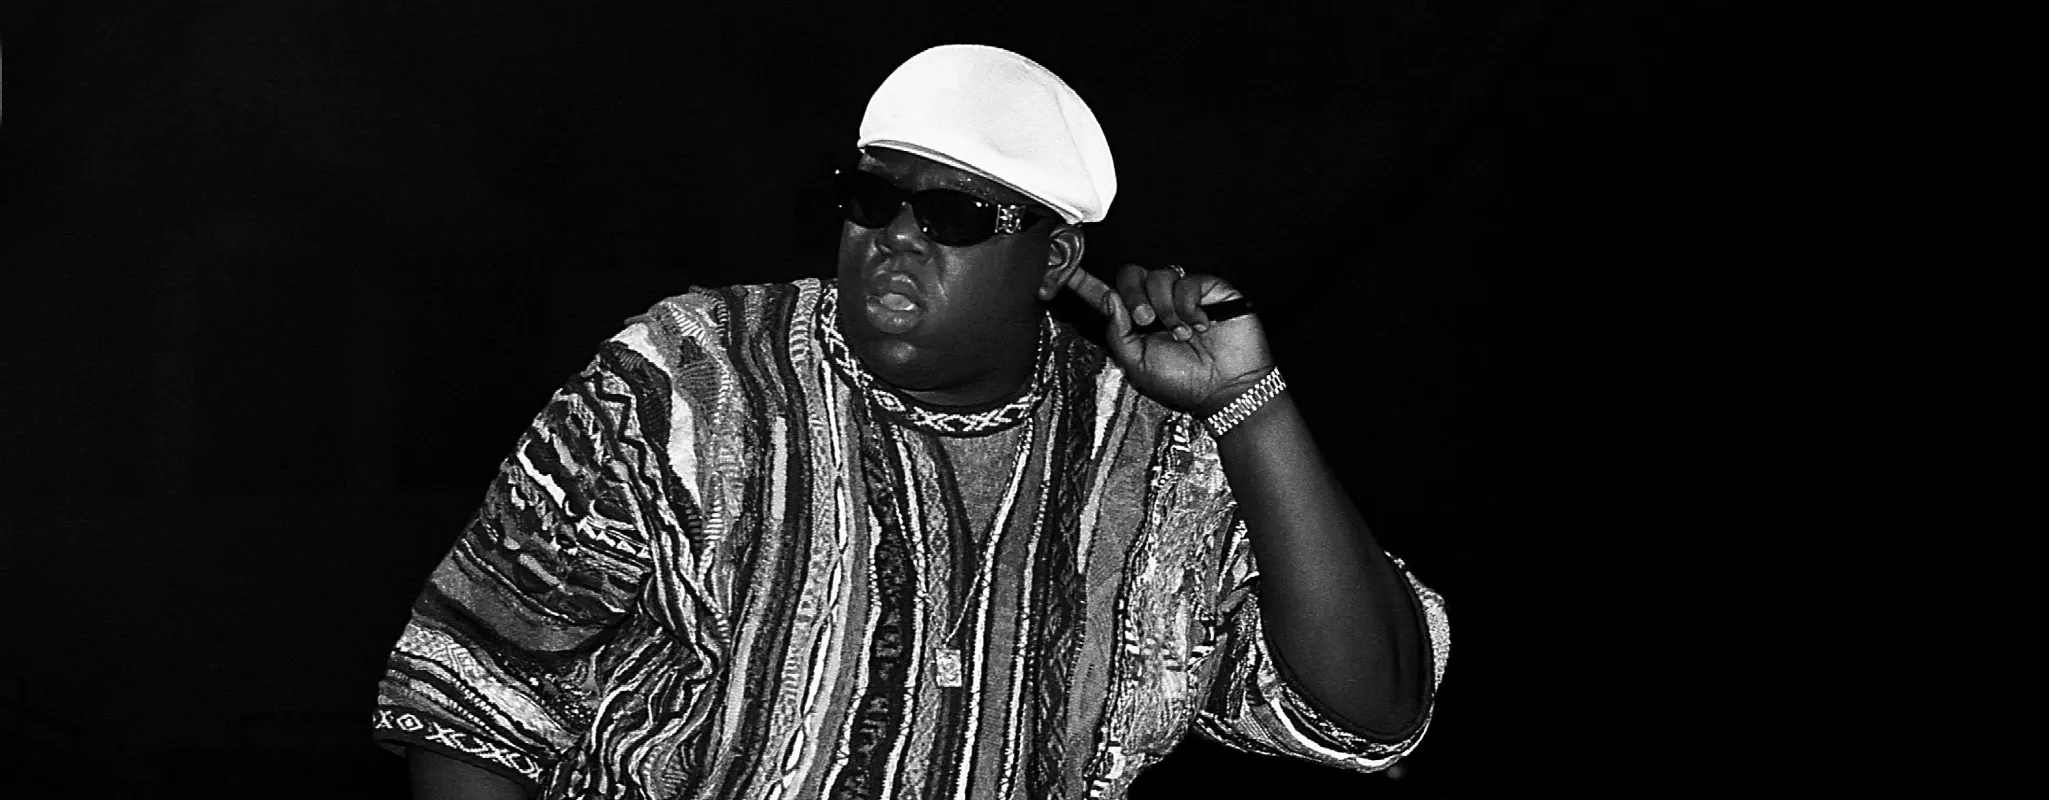 Diddy Calls The Notorious B.I.G. the “Greatest Rapper of All Time” on 26th Anniversary of His Death